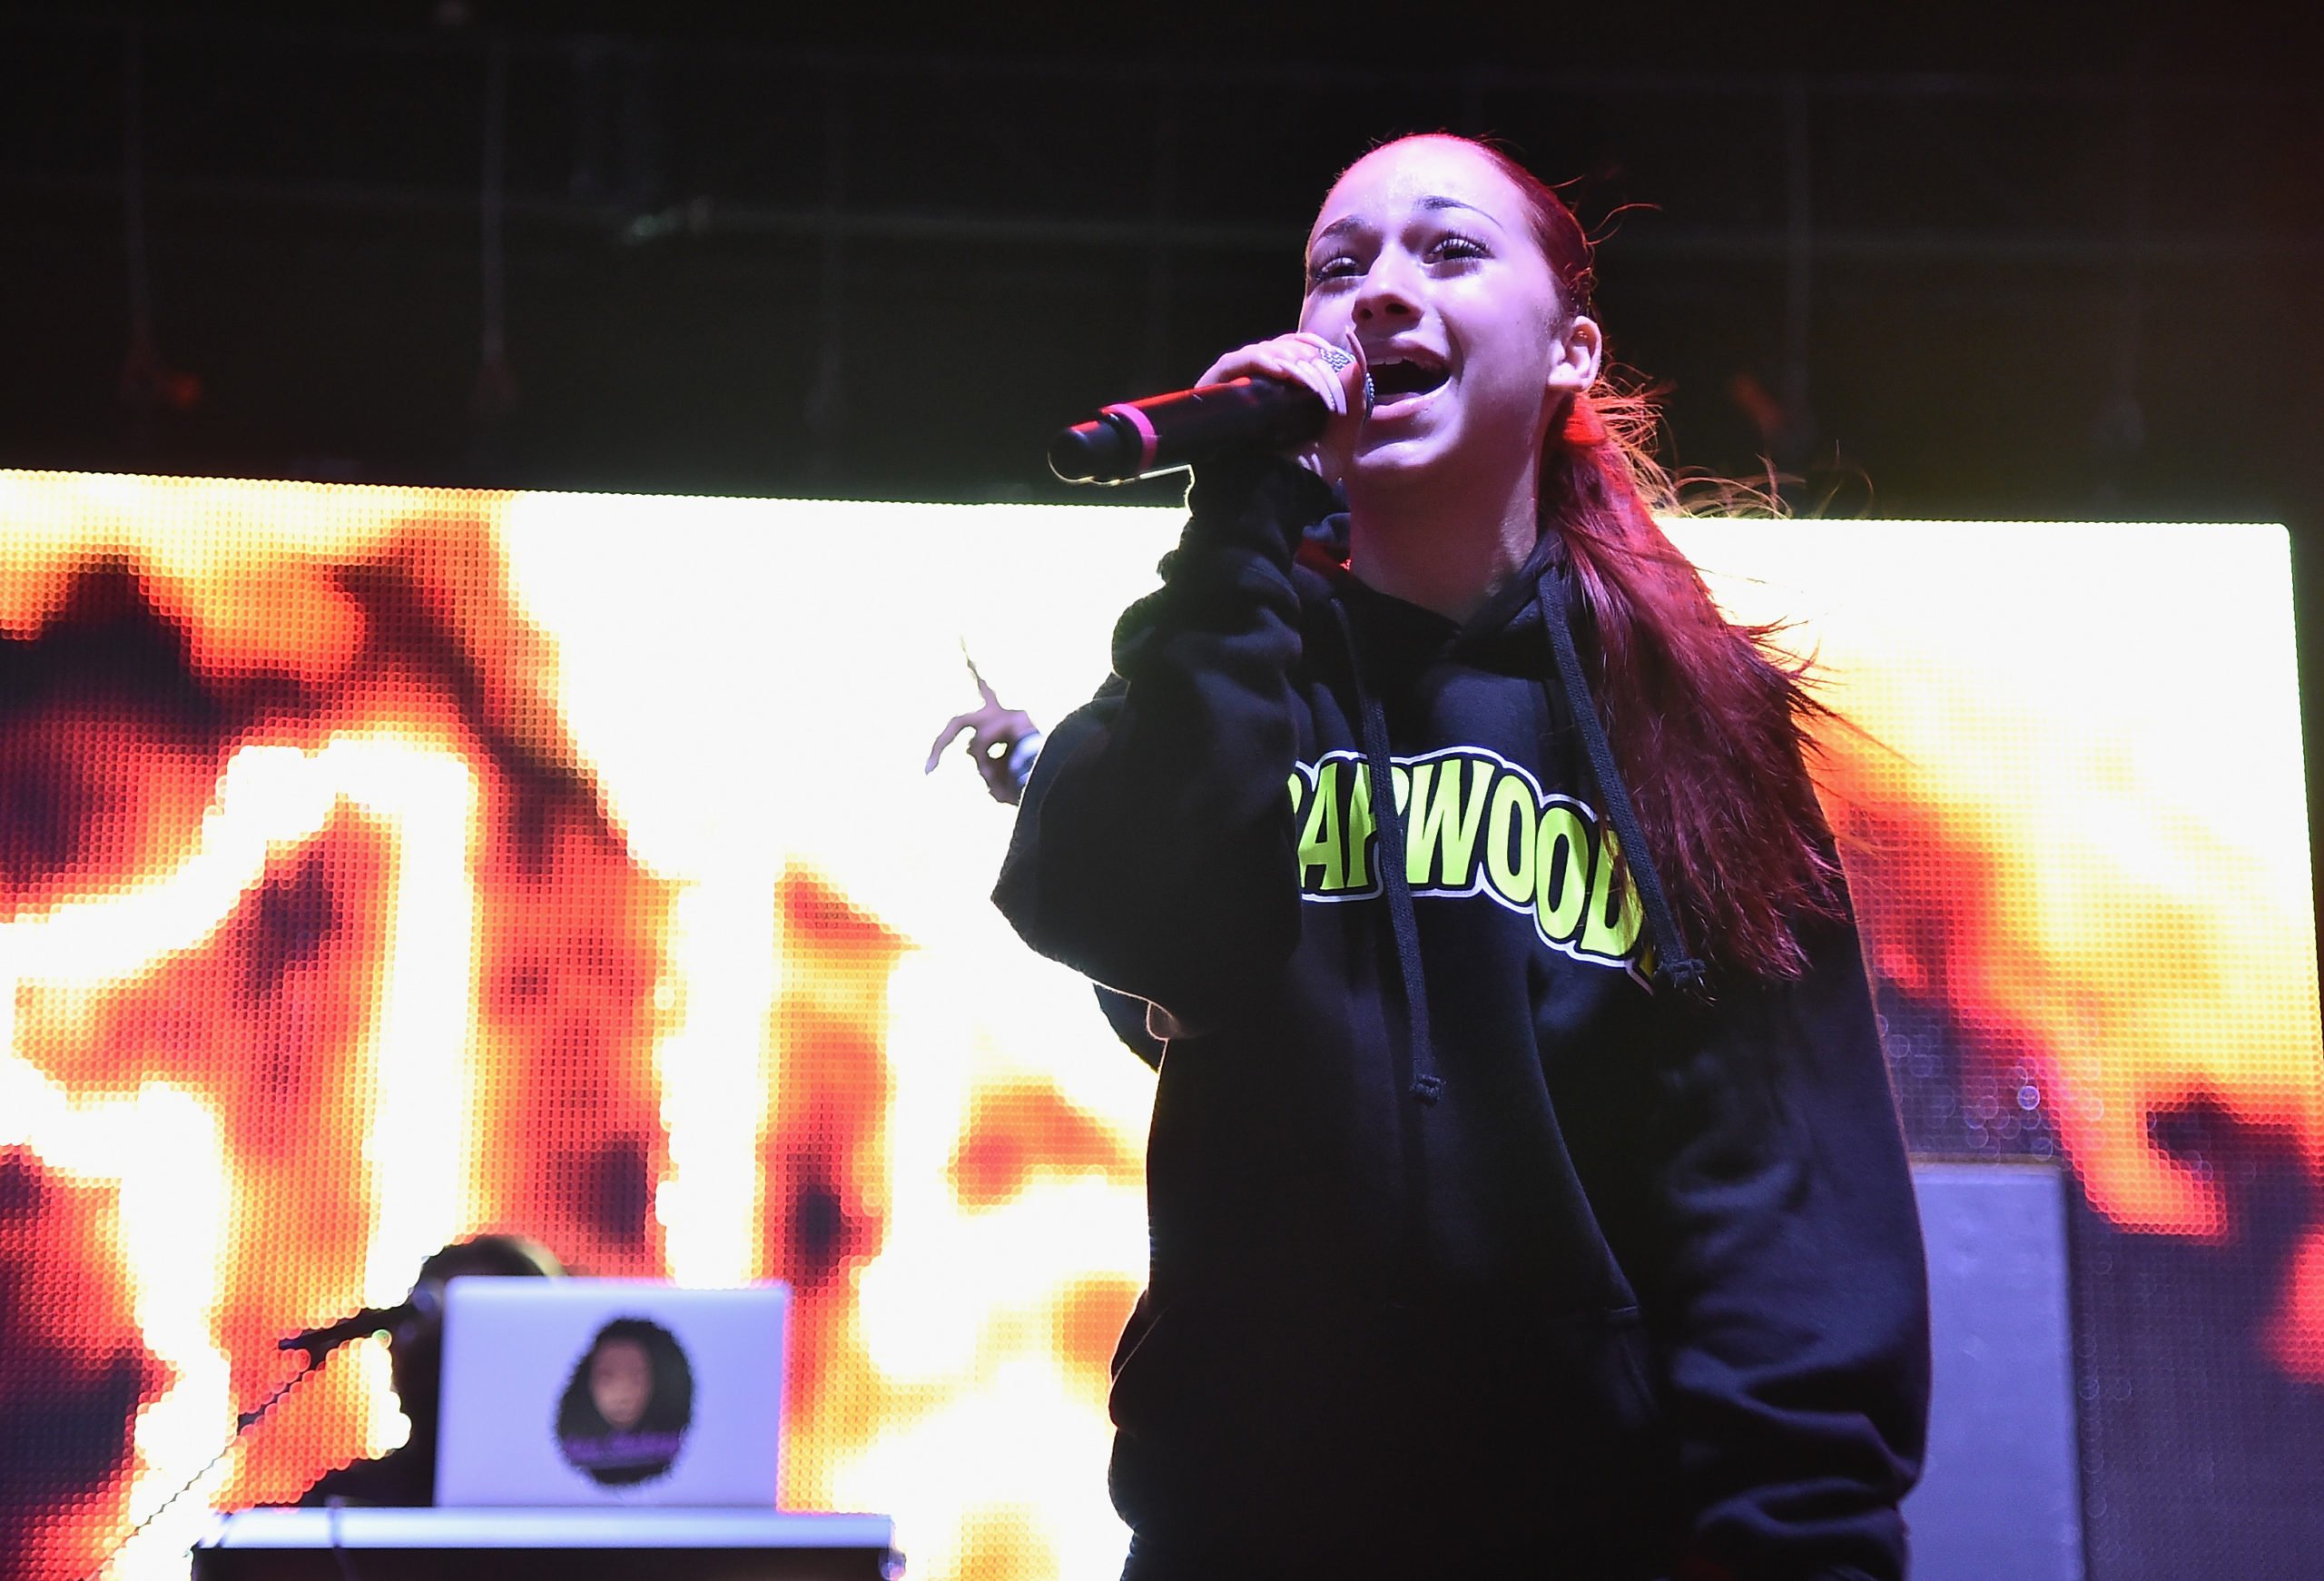 WANTAGH, NY - AUGUST 19: Bhad Bhabie performs onstage during Day 2 of Billboard Hot 100 Festival 2018 at Northwell Health at Jones Beach Theater on August 19, 2018 in Wantagh, New York. (Photo by Theo Wargo/Getty Images for Billboard)